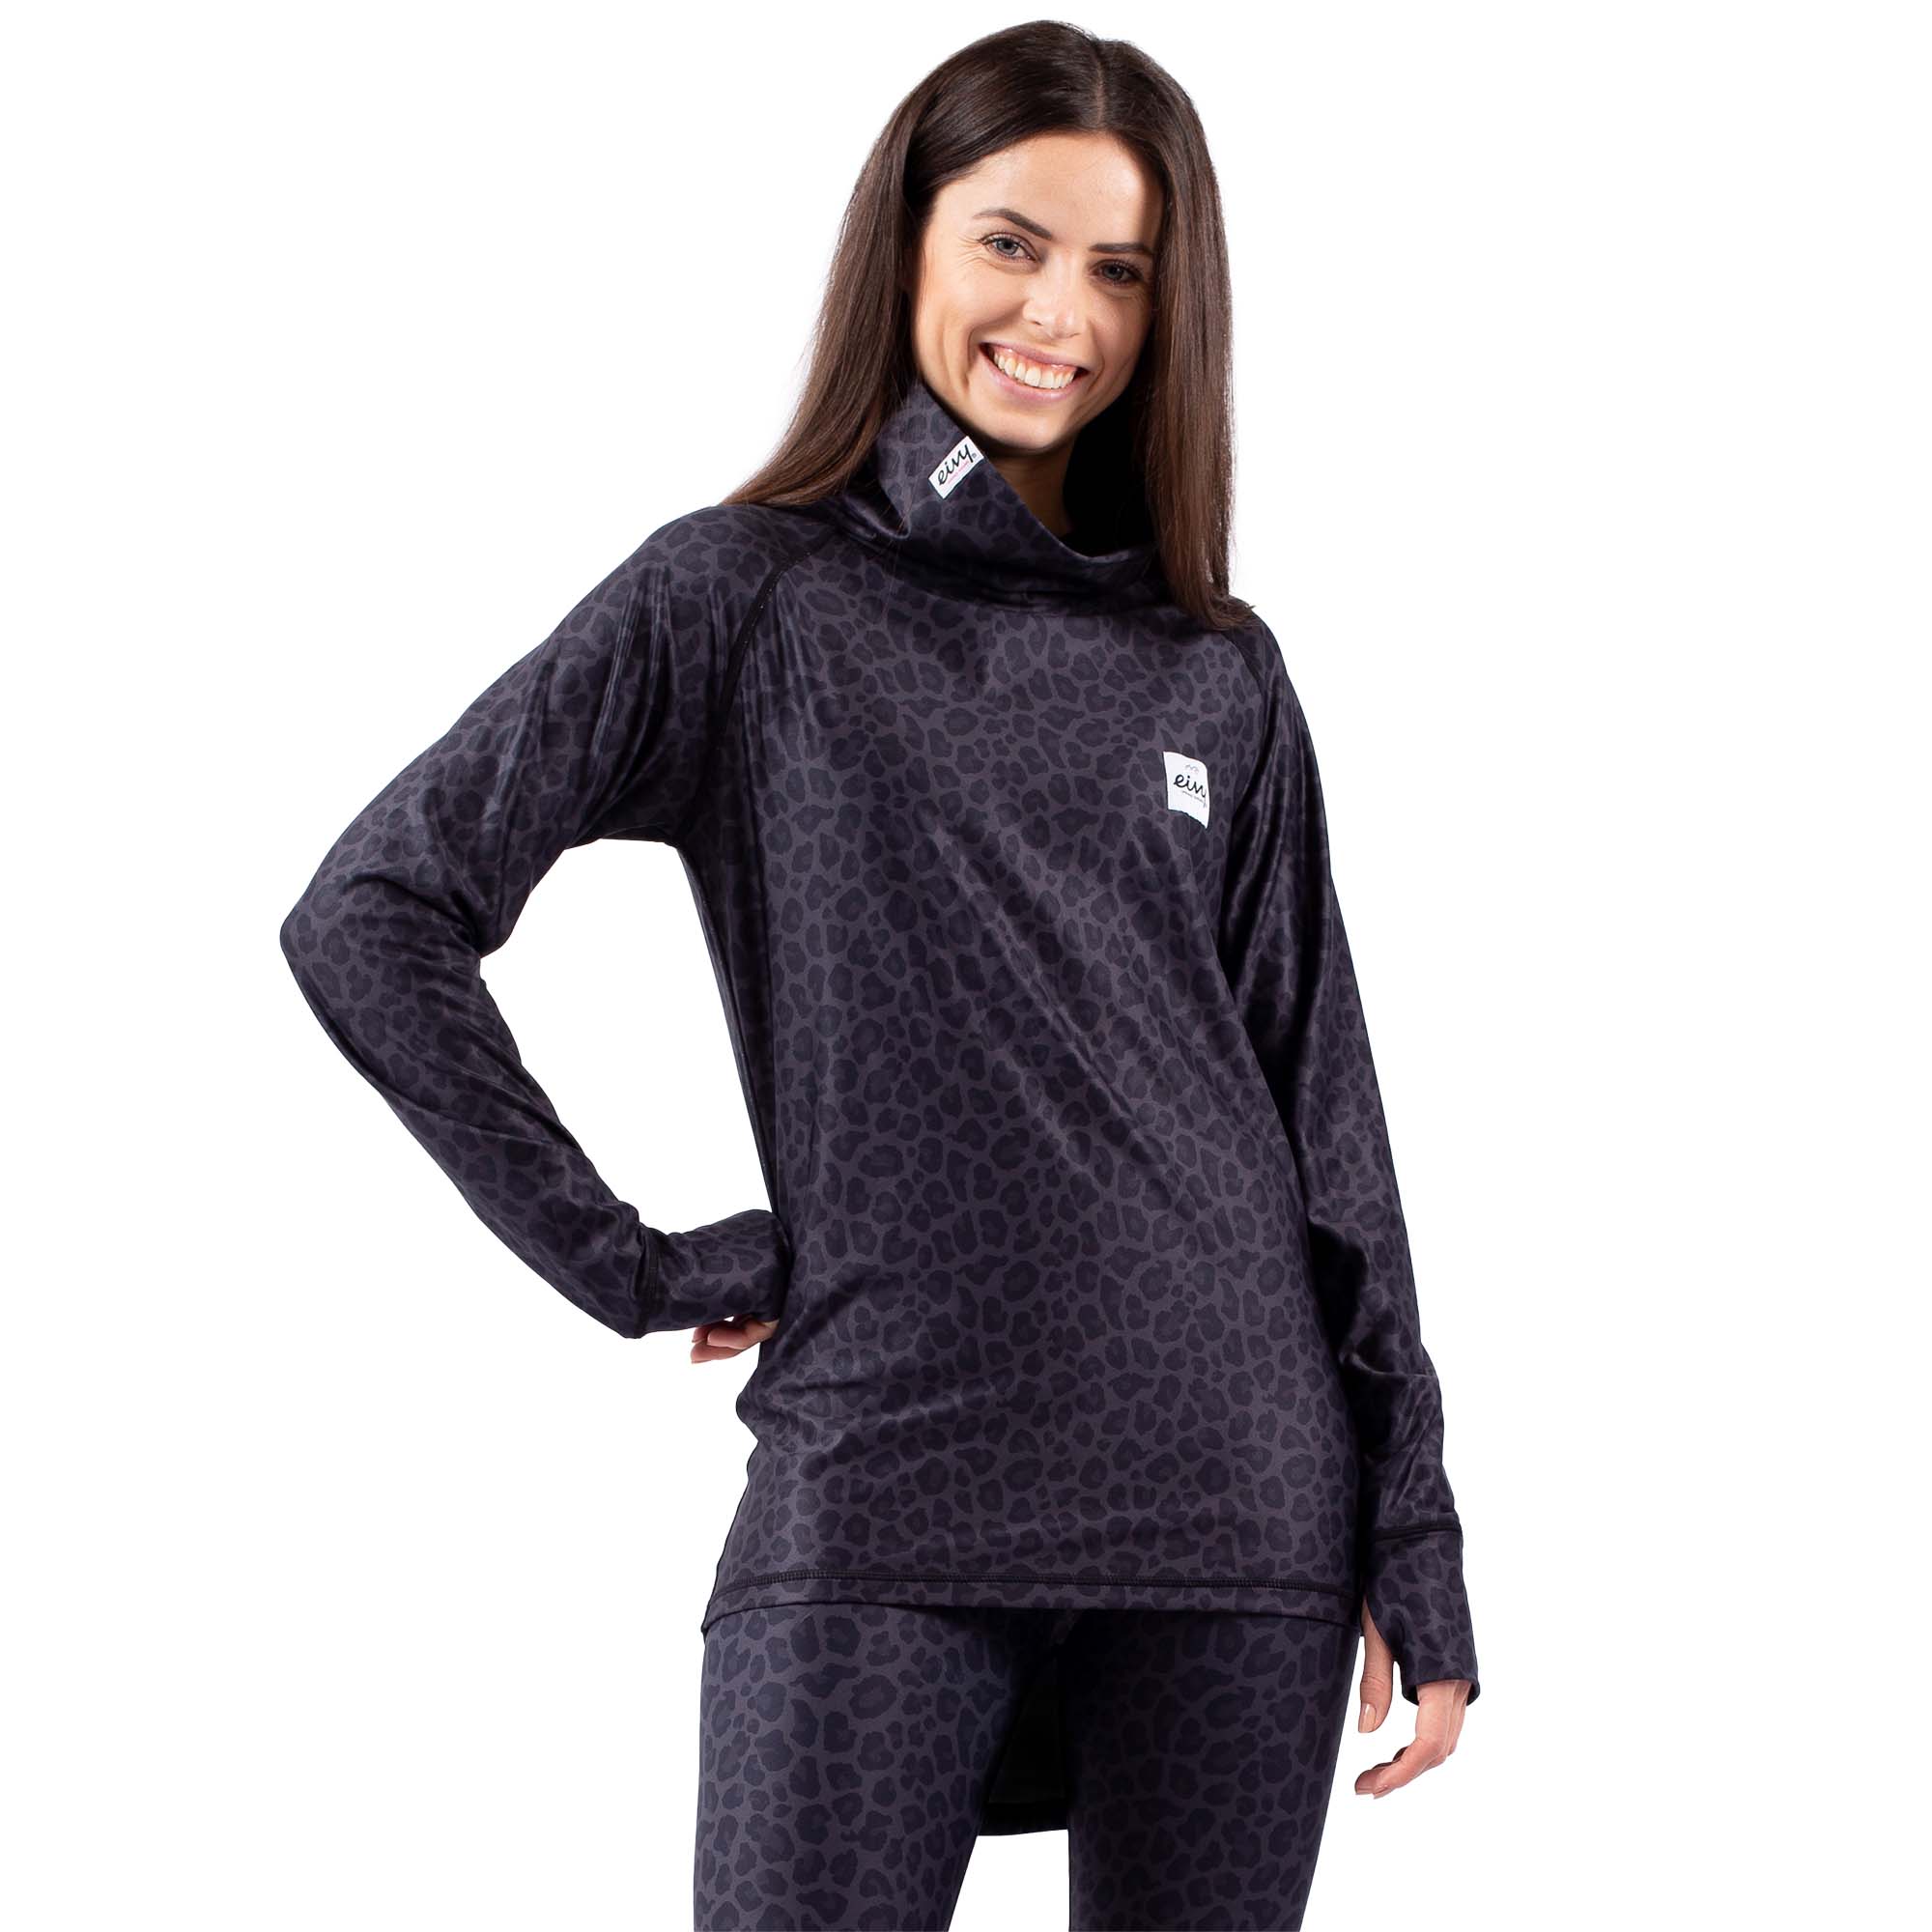 Eivy Icecold Top Women's Ski Thermal Baselayer 